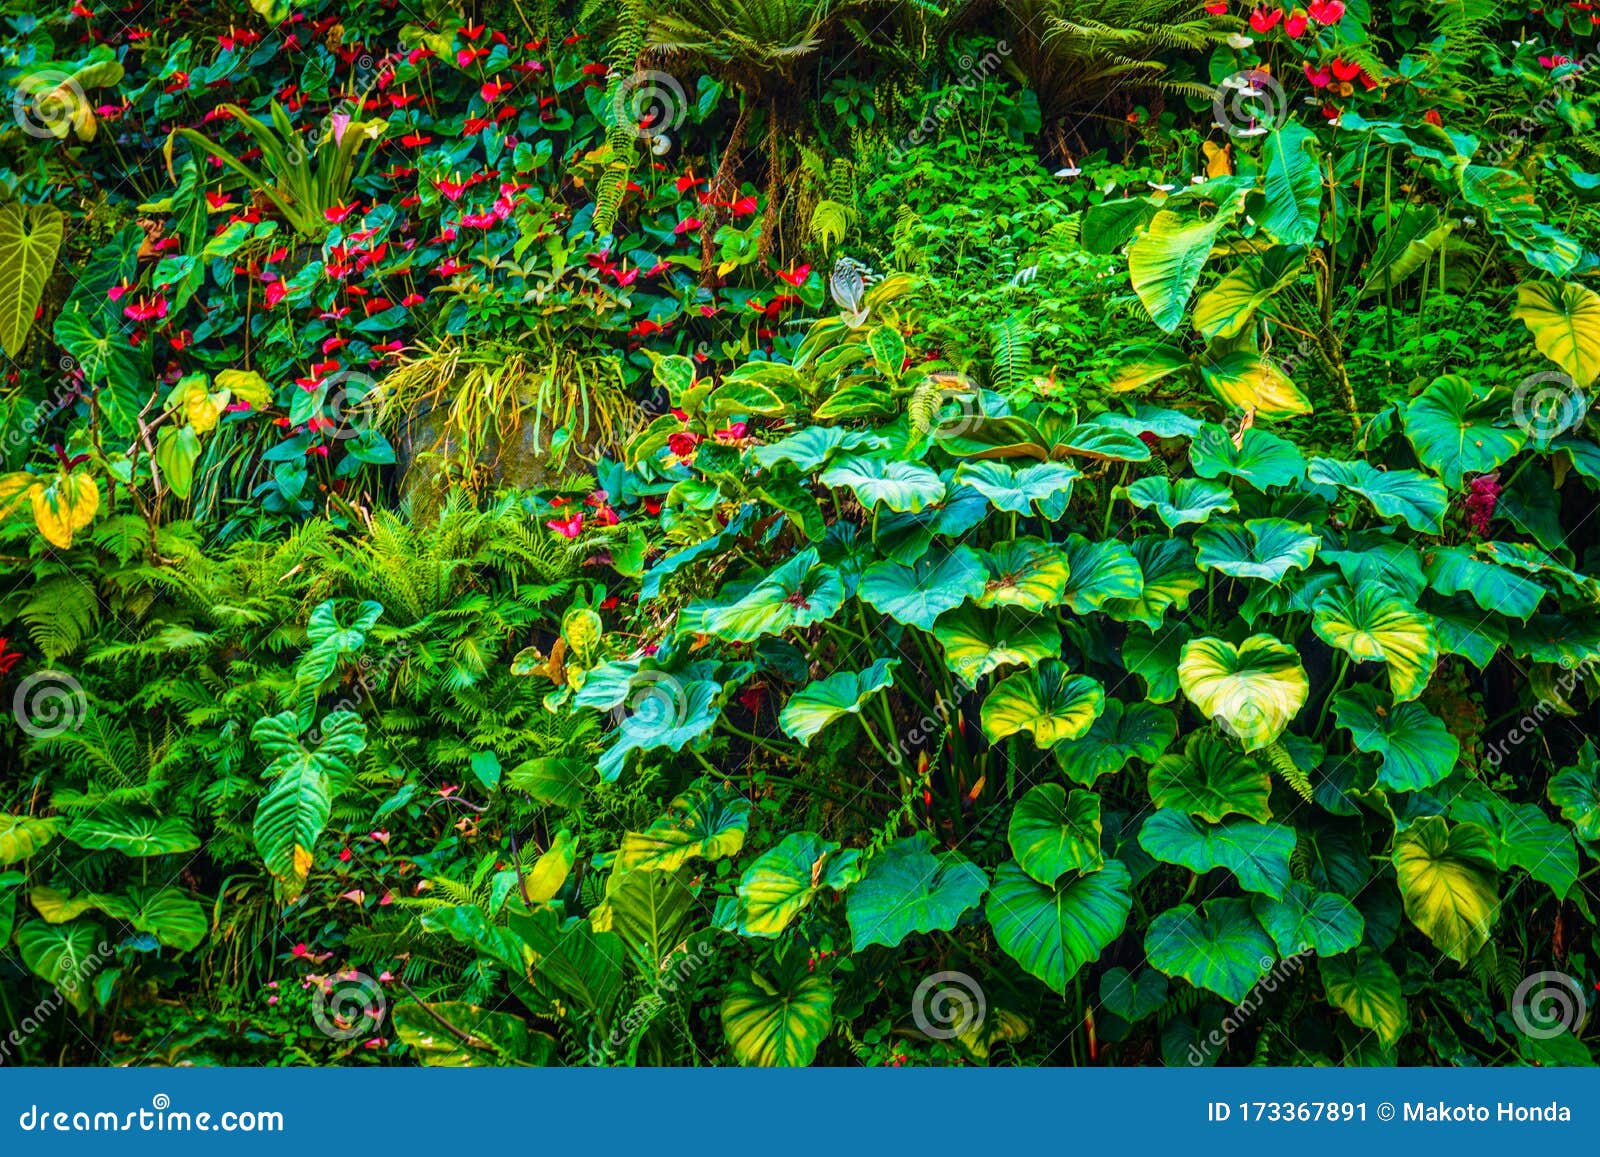 Flora of the Tropical Jungle Stock Image - Image of plant, outdoor:  173367891